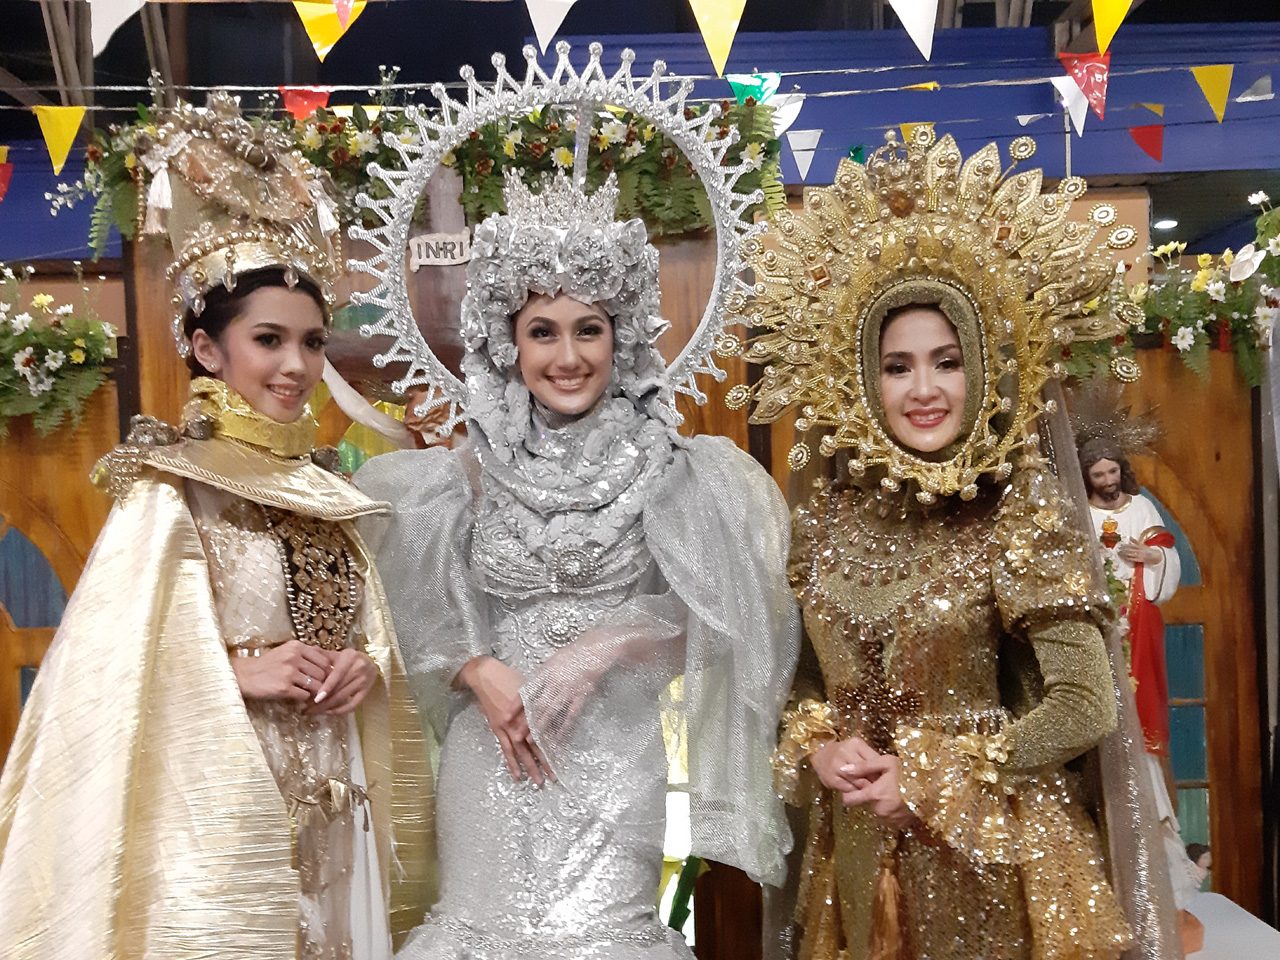 LOOK: Marian fashion event in Baguio City